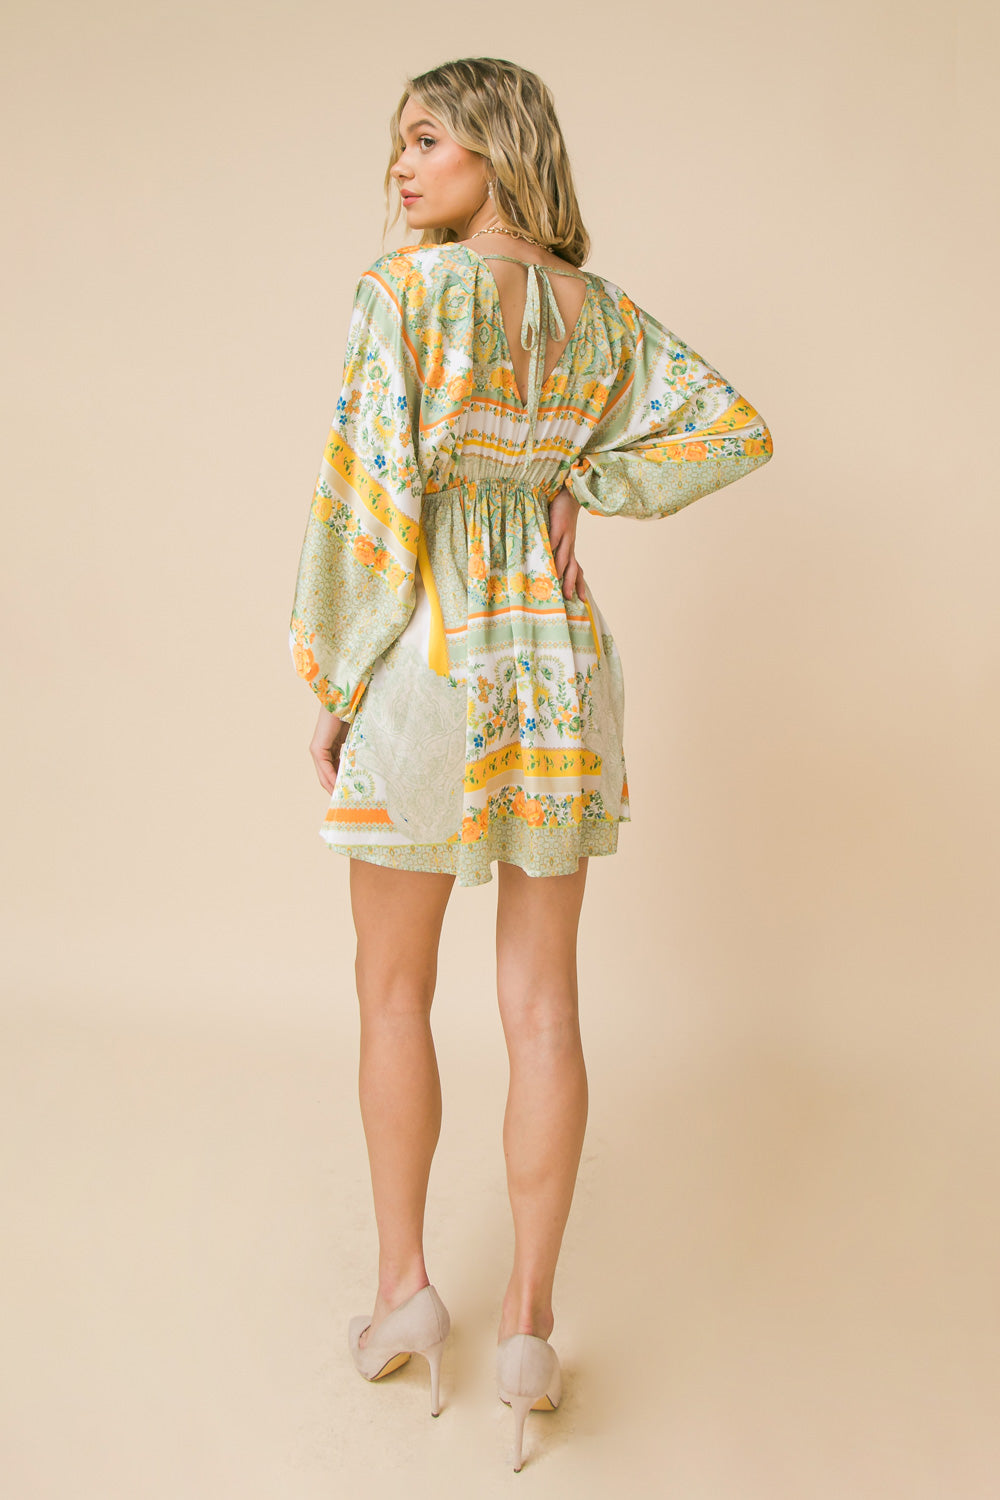 ALL THE TRENDS WOVEN MINI DRESS